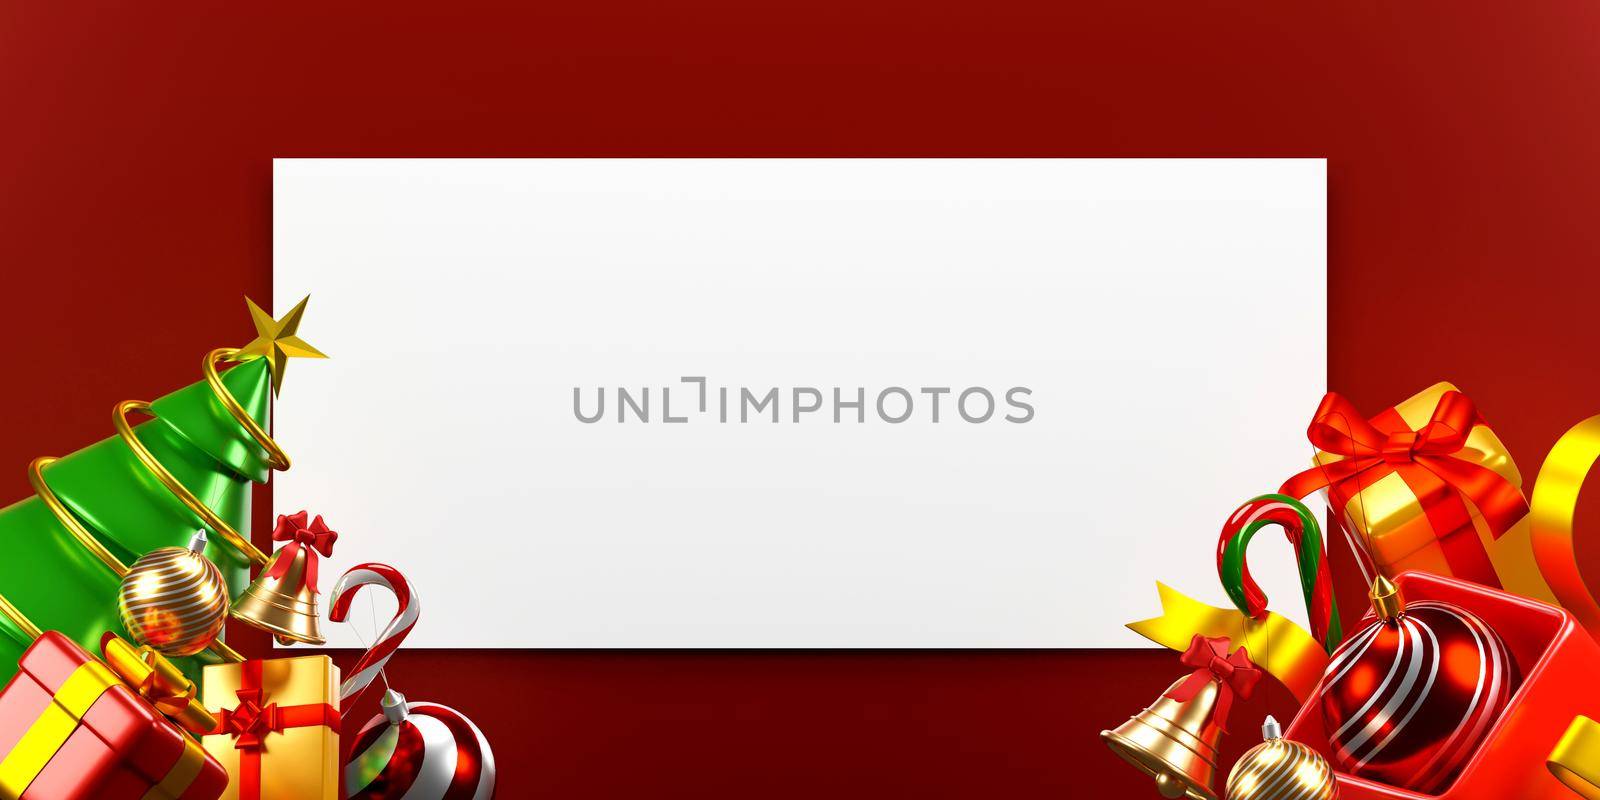 White paper mockup on red background with Christmas ornaments, 3d illustration by nutzchotwarut